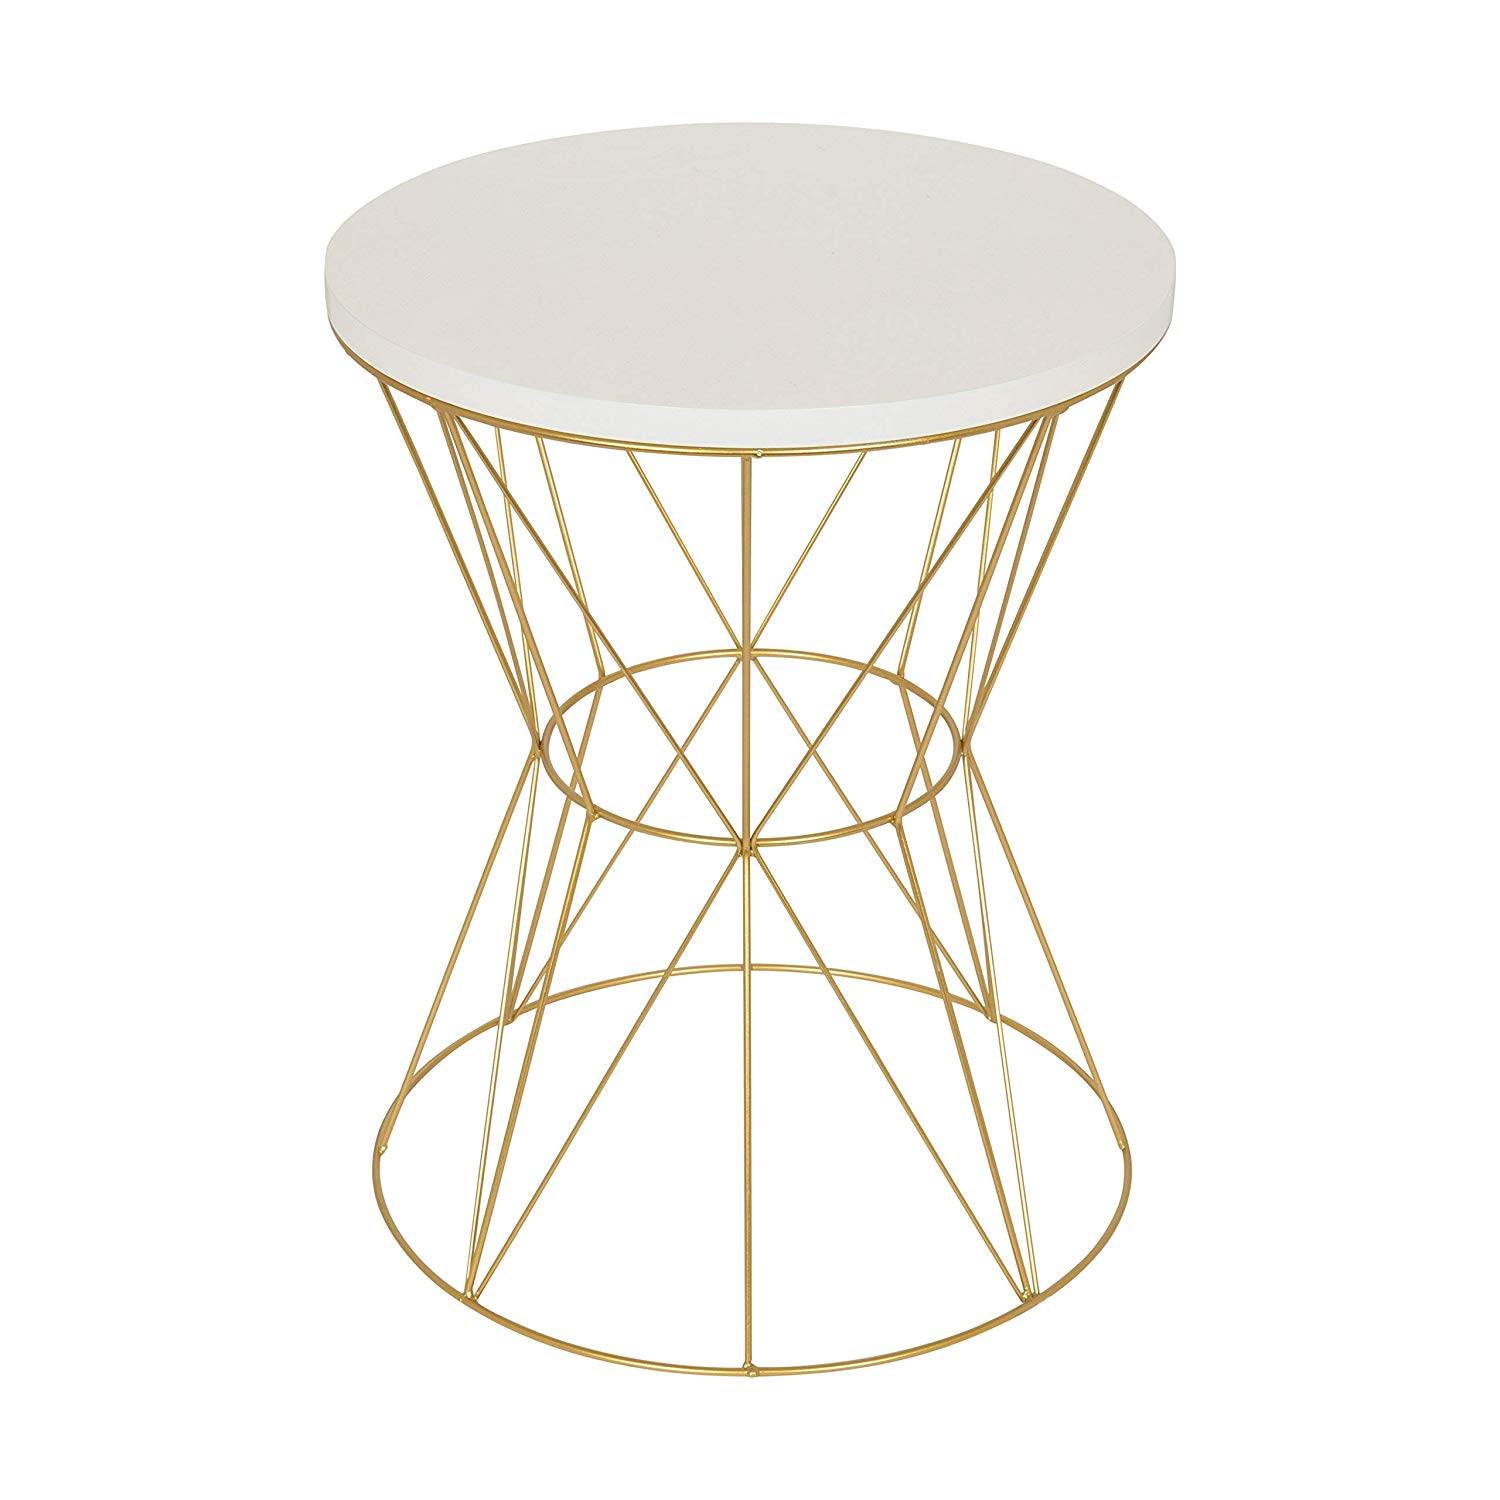 kate and laurel mendel round accent table with cage antique gold faceted glass top metal frame white kitchen dining small corner desk slim side furniture pier one living room